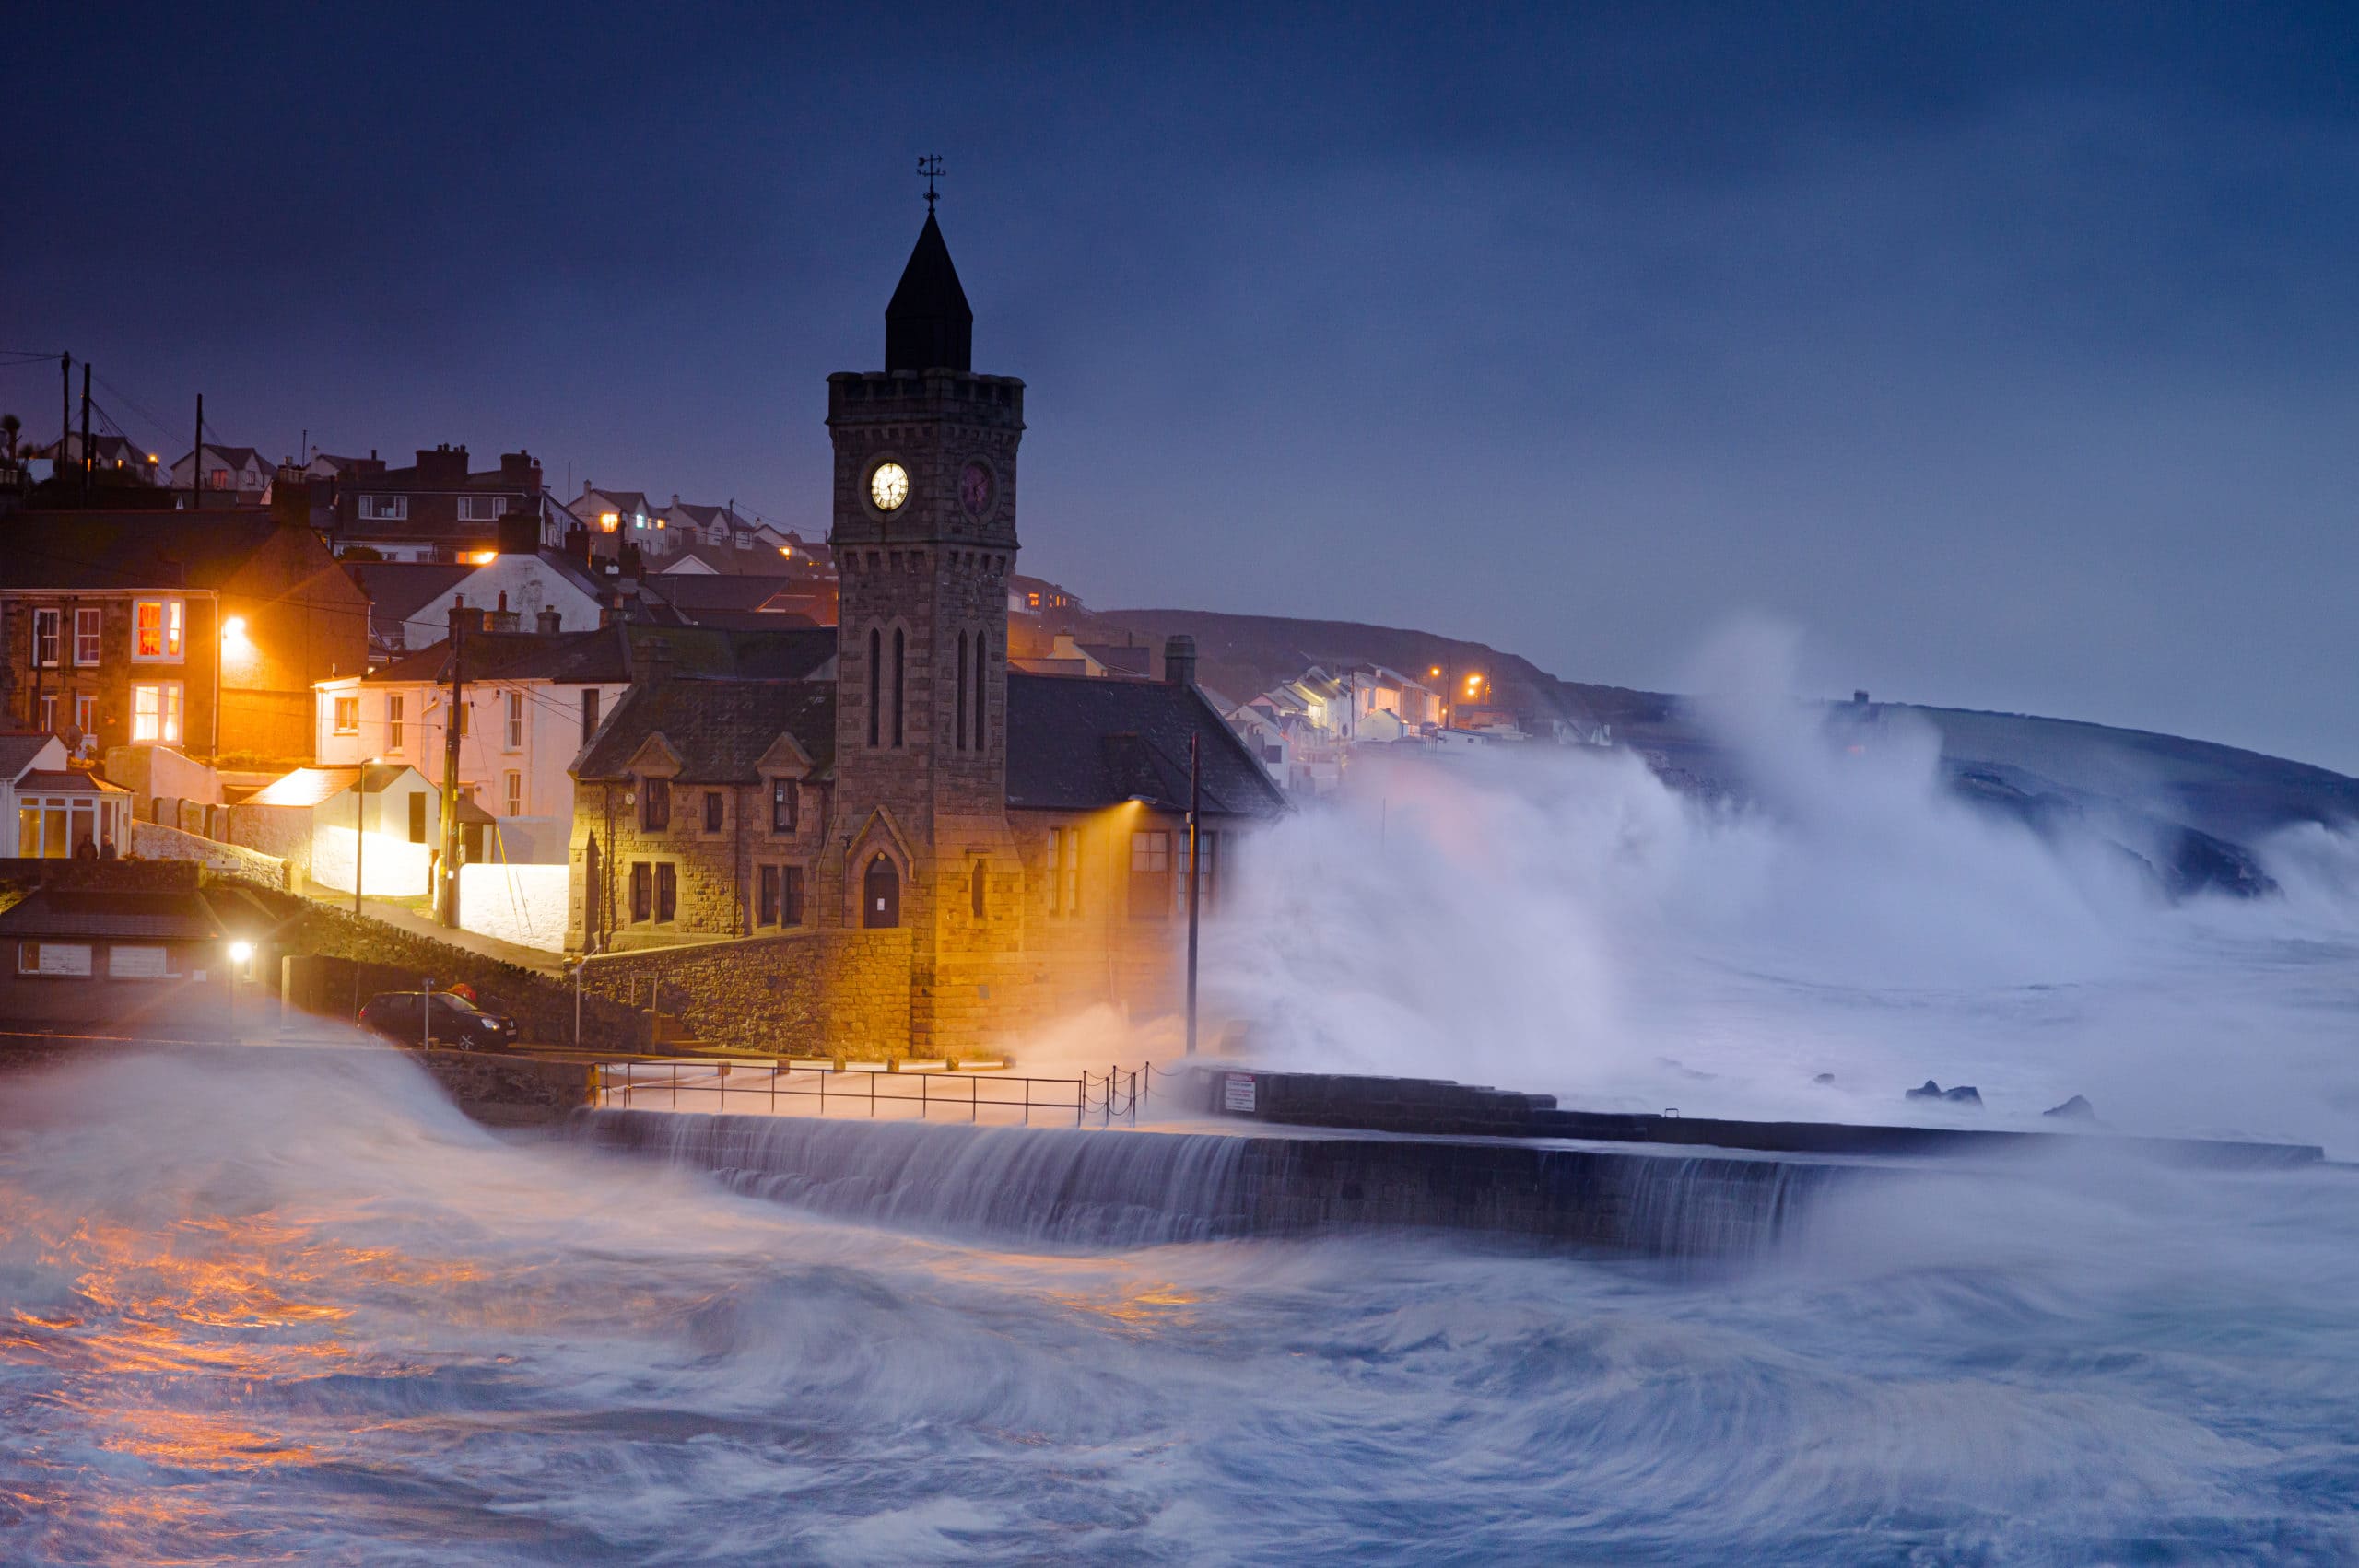 Stormy seas at Porthleven, Cornwall